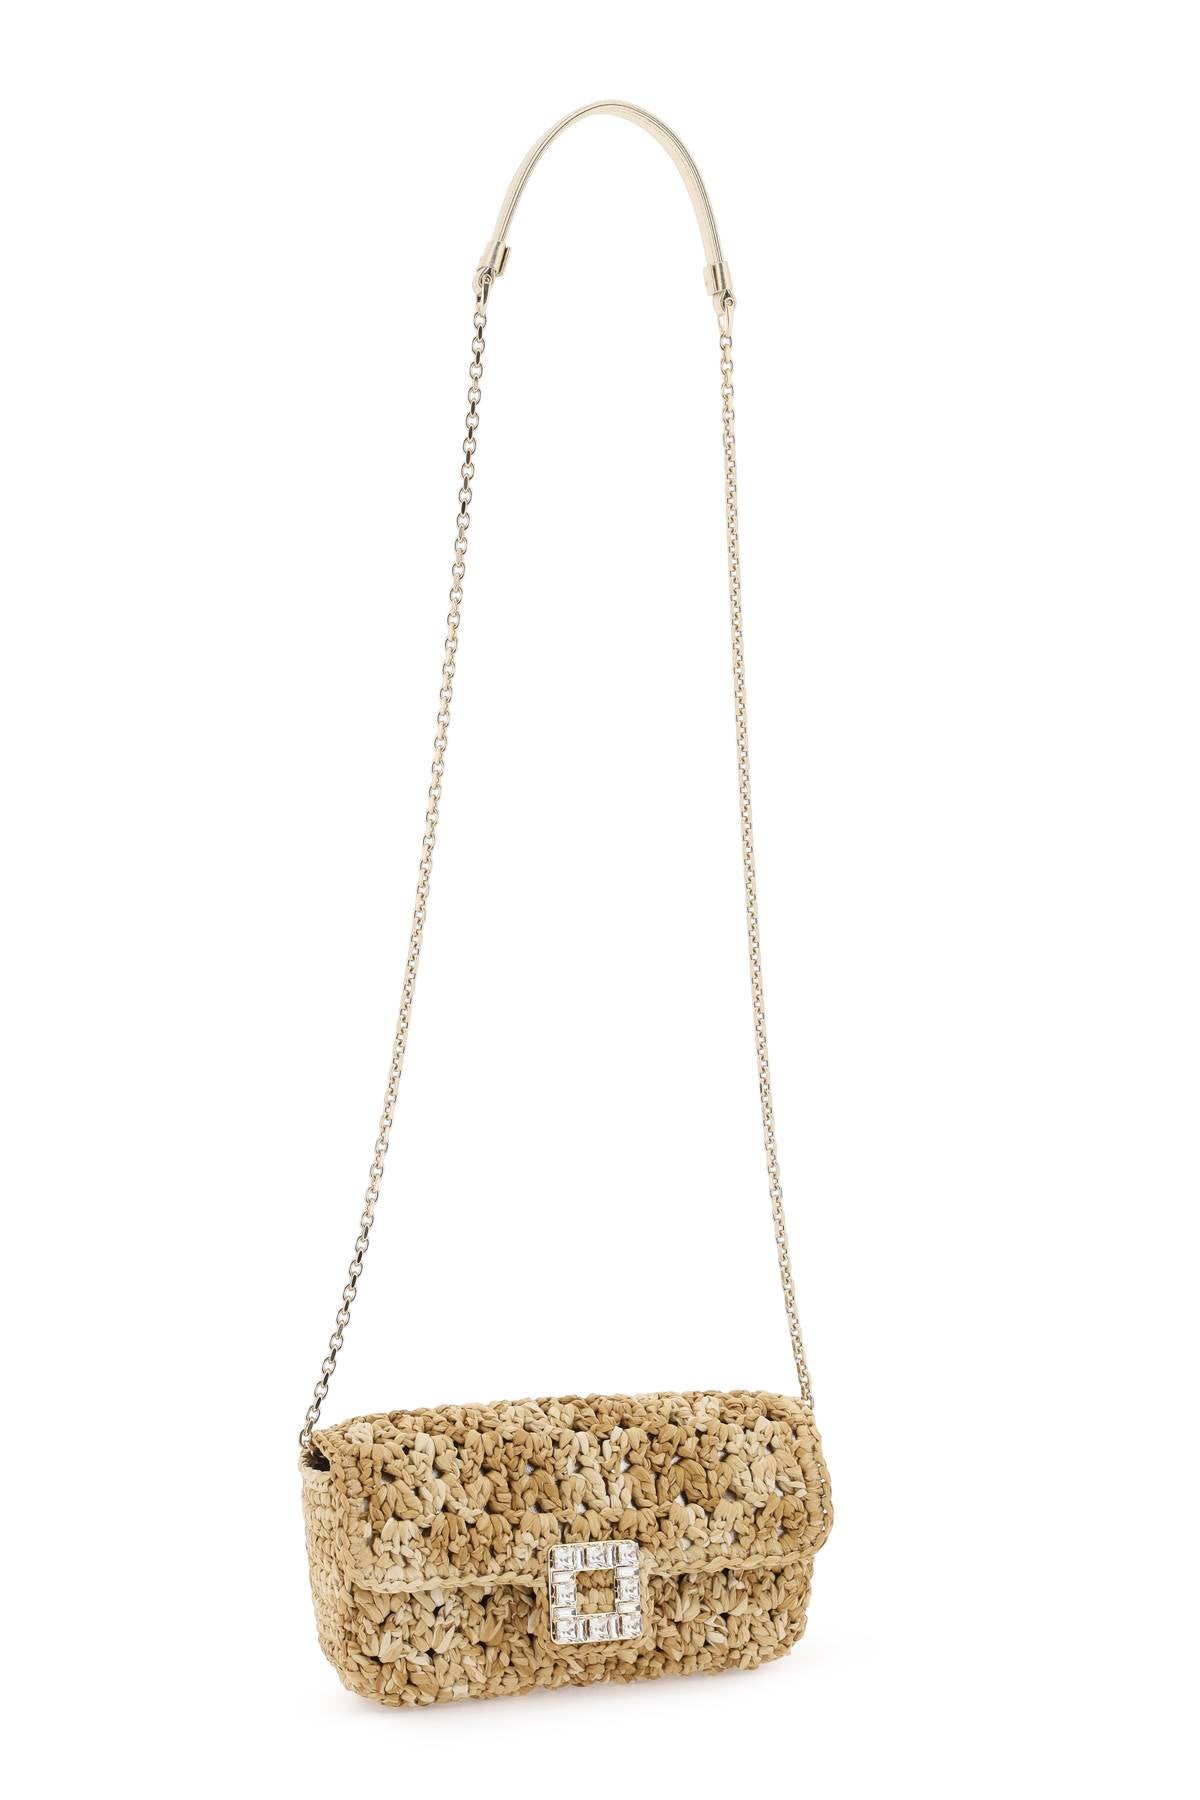 ROGER VIVIER Grey Raffia Clutch with Crystal Buckle and Removable Chain Strap for Women